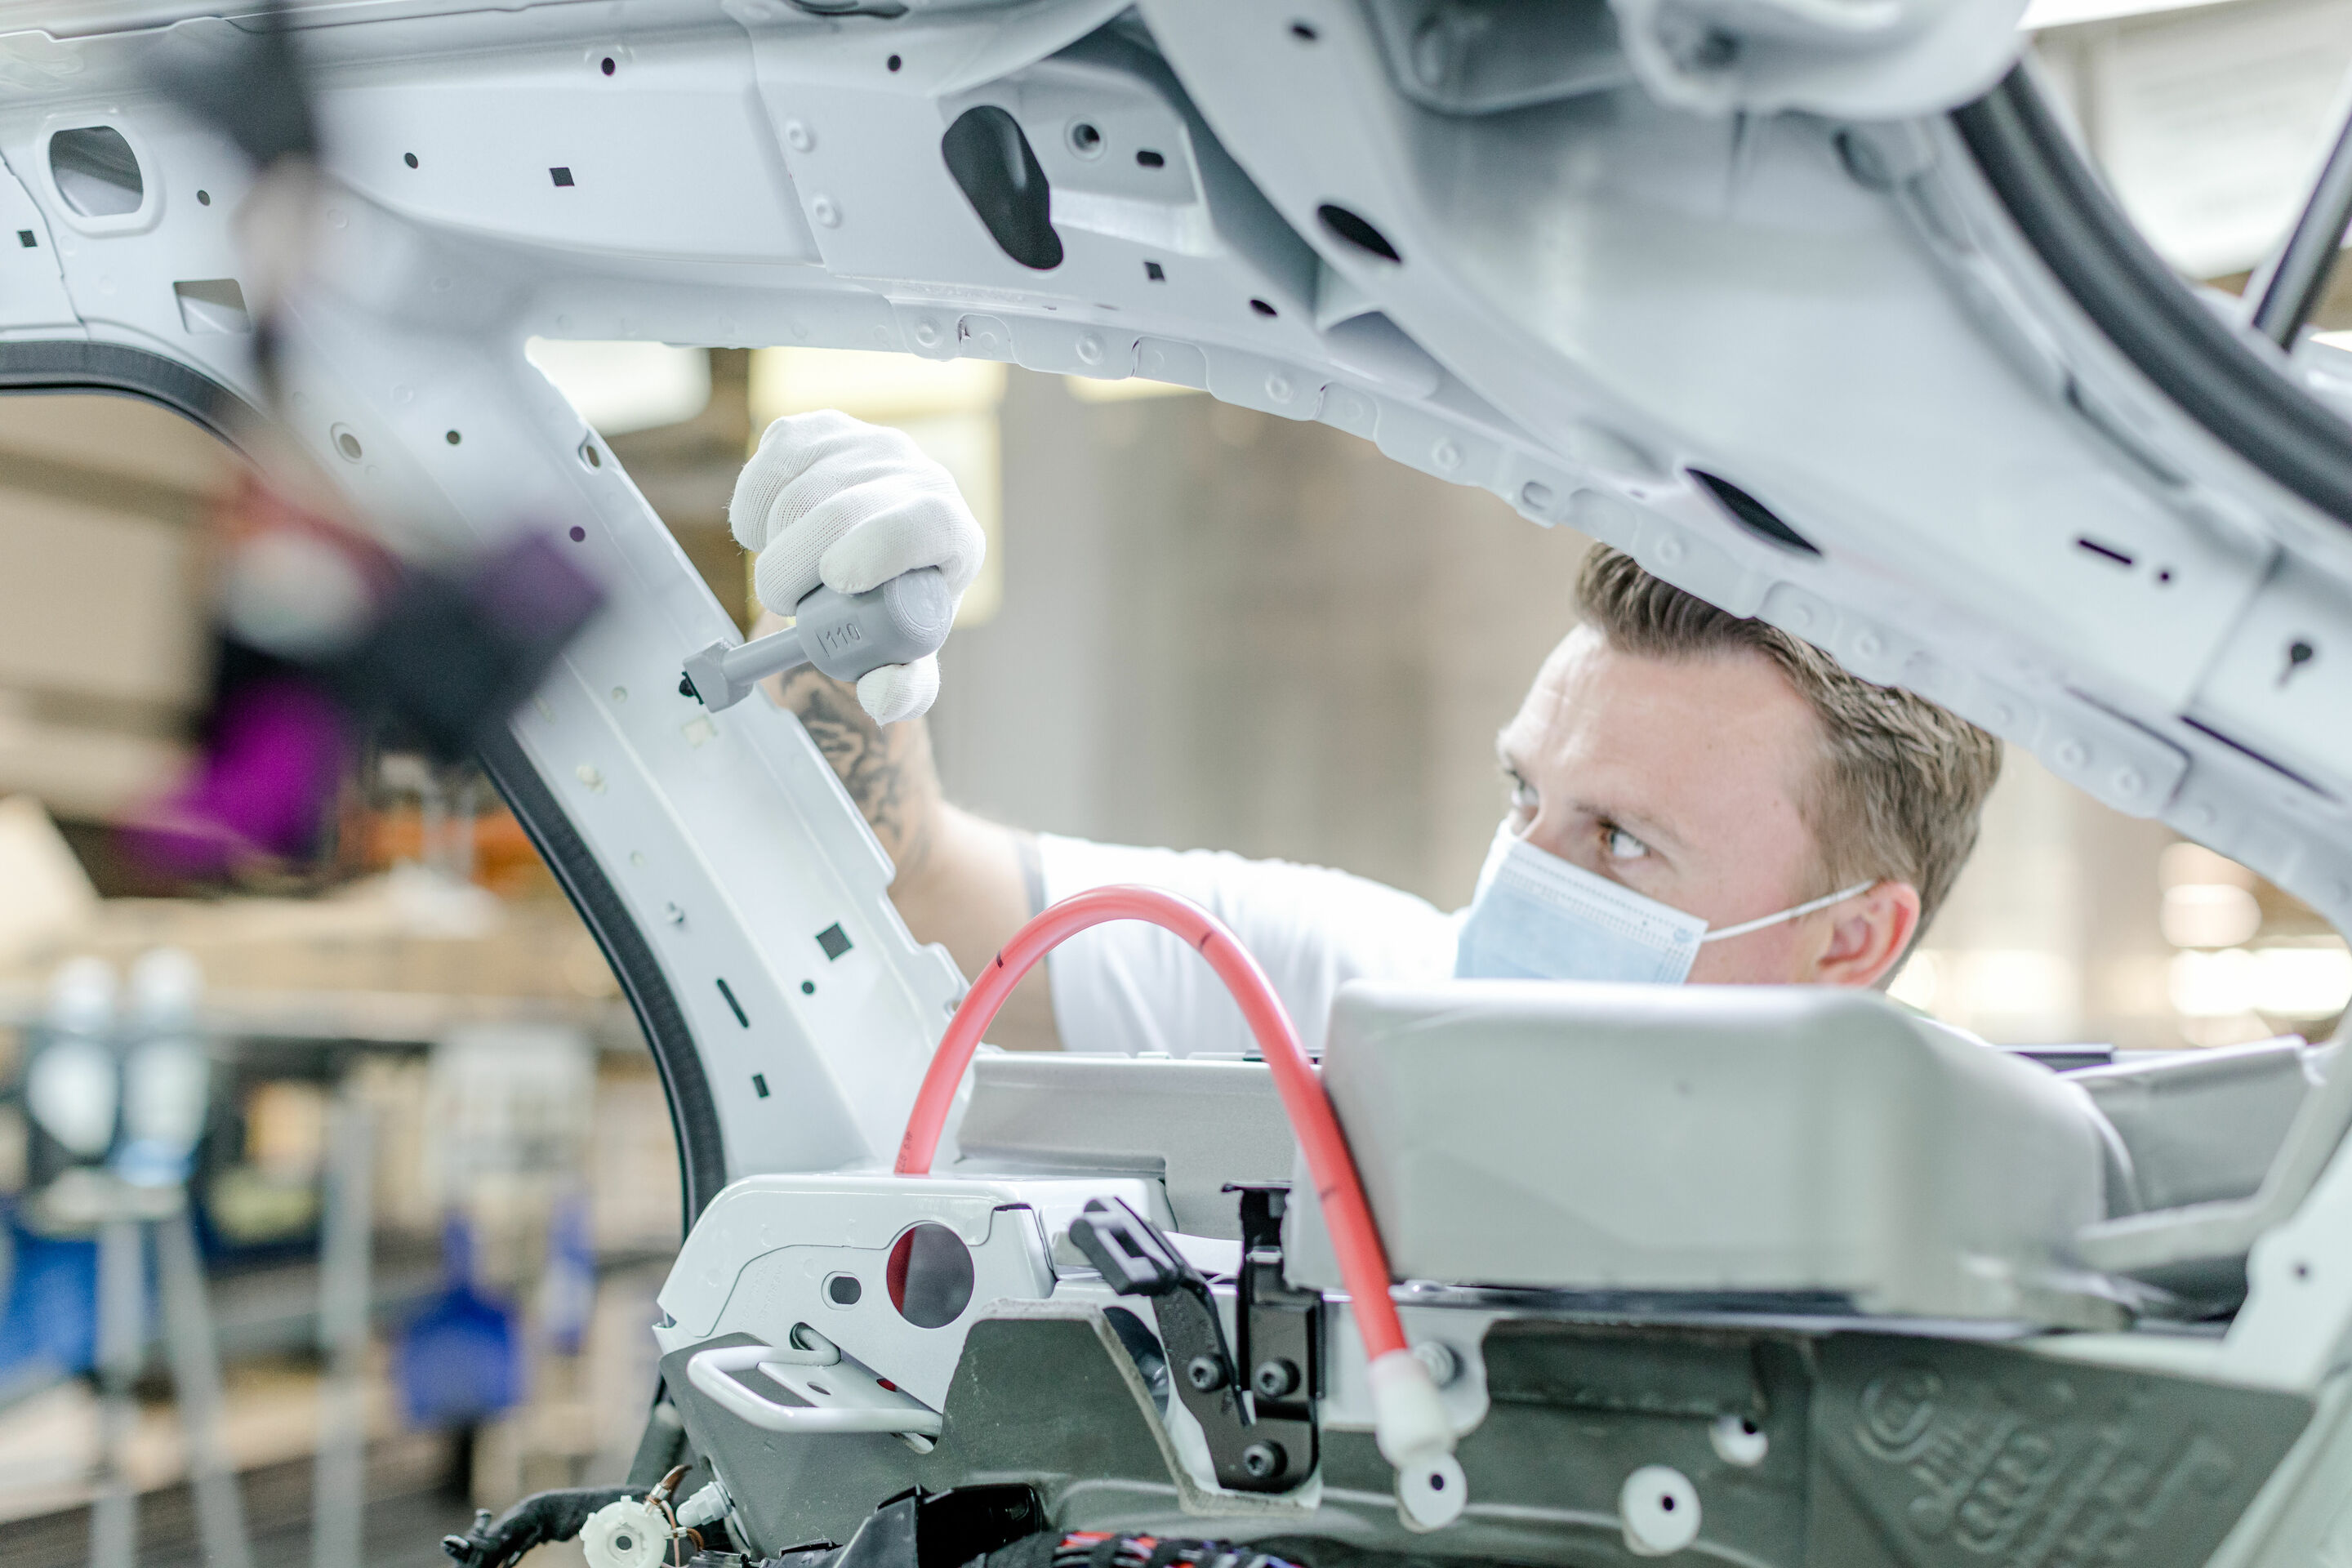 Mission:Zero at Neckarsulm site: Audi is shaping the future of production, consistently and sustainably